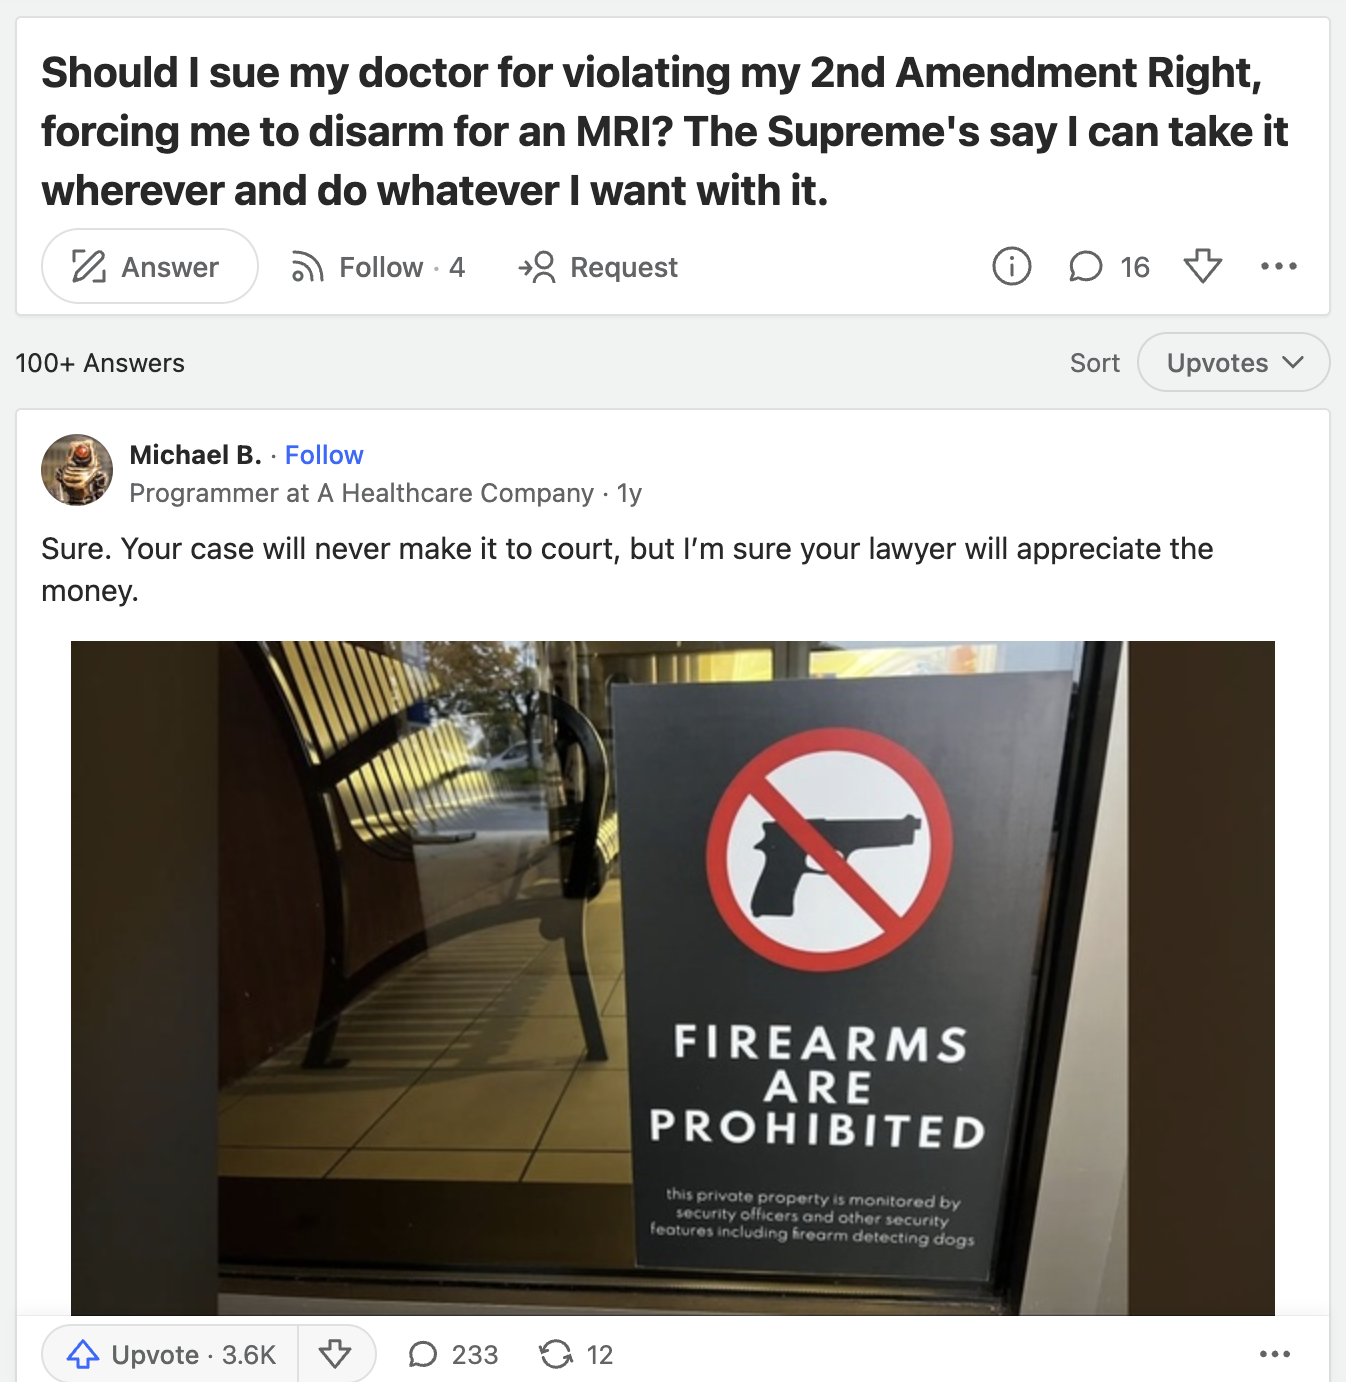 screenshot - Should I sue my doctor for violating my 2nd Amendment Right, forcing me to disarm for an Mri? The Supreme's say I can take it wherever and do whatever I want with it. Answer 4 Request 100 Answers 16 Sort Upvotes Michael B. Programmer at A Hea